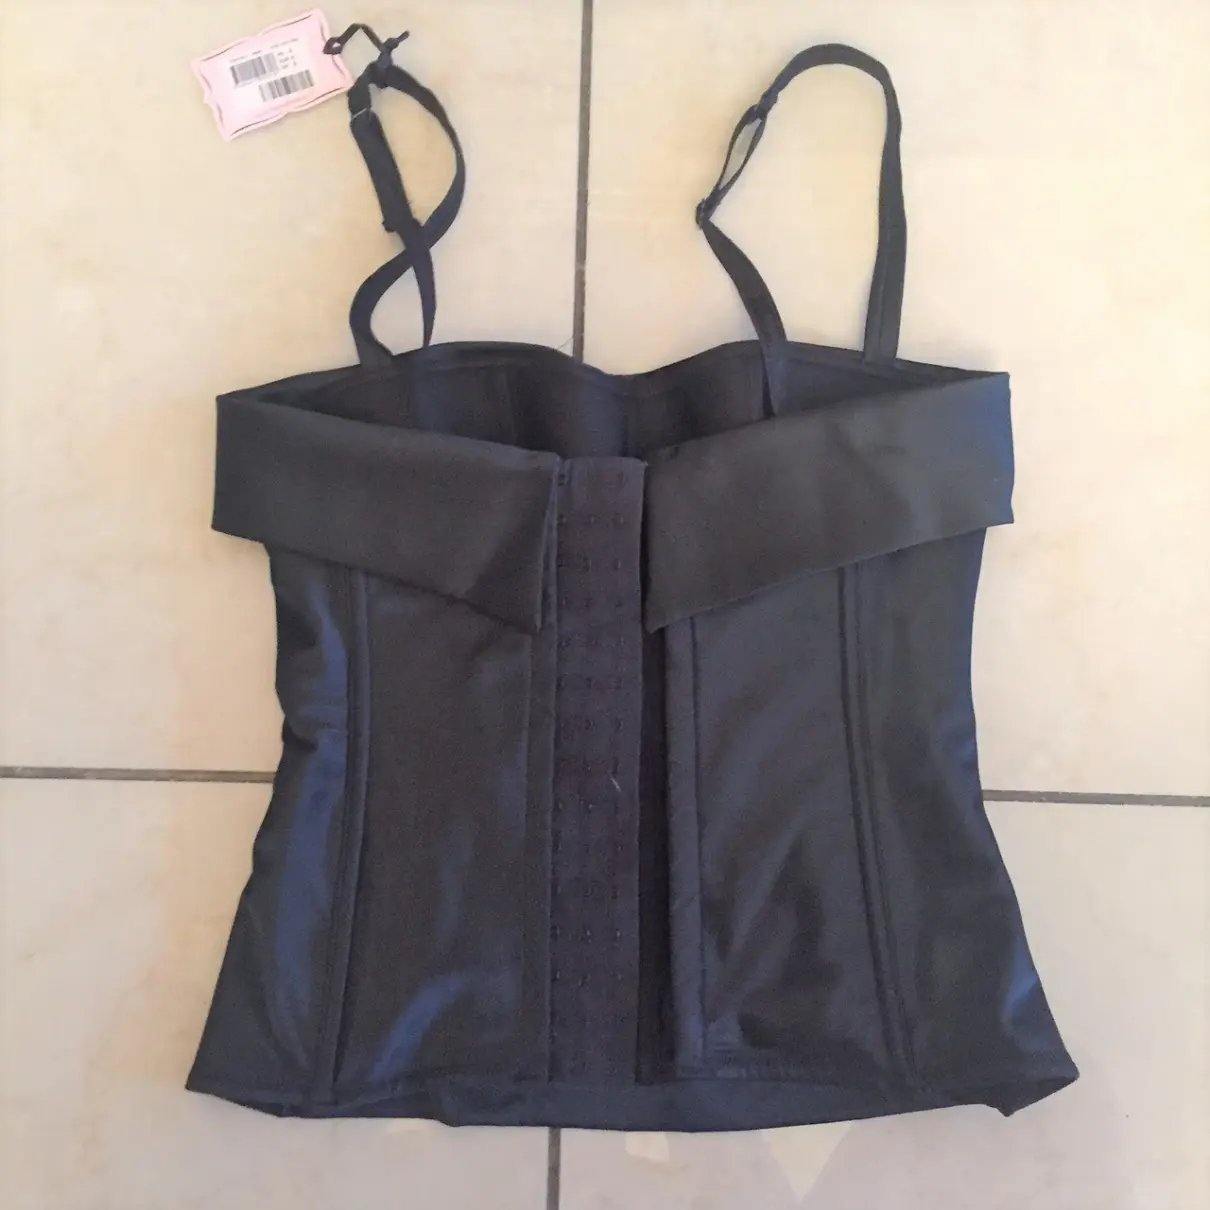 Chantal Thomass Bustier for sale